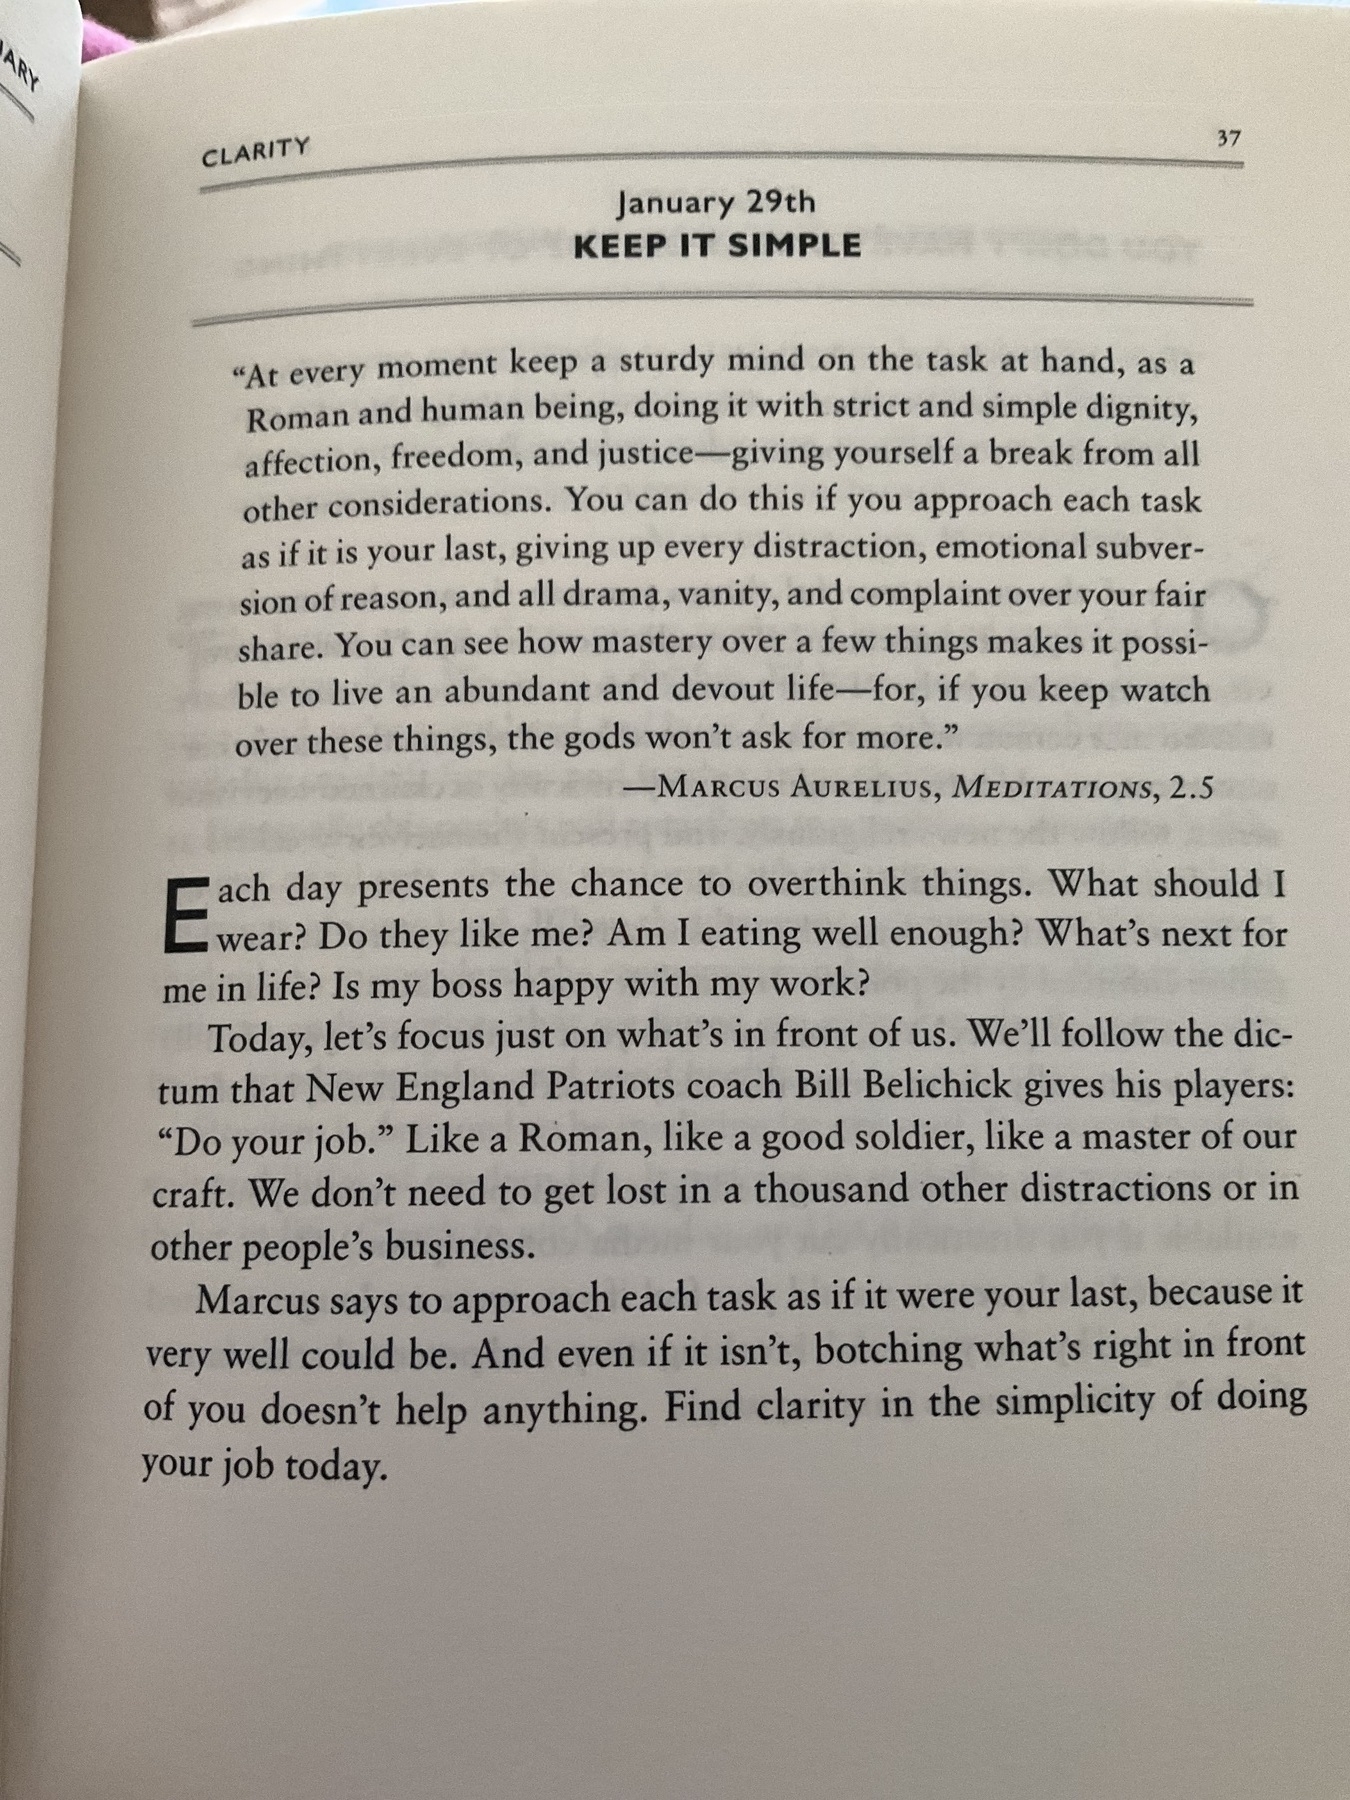 The Daily Stoic … The Daily Quote … Page 37